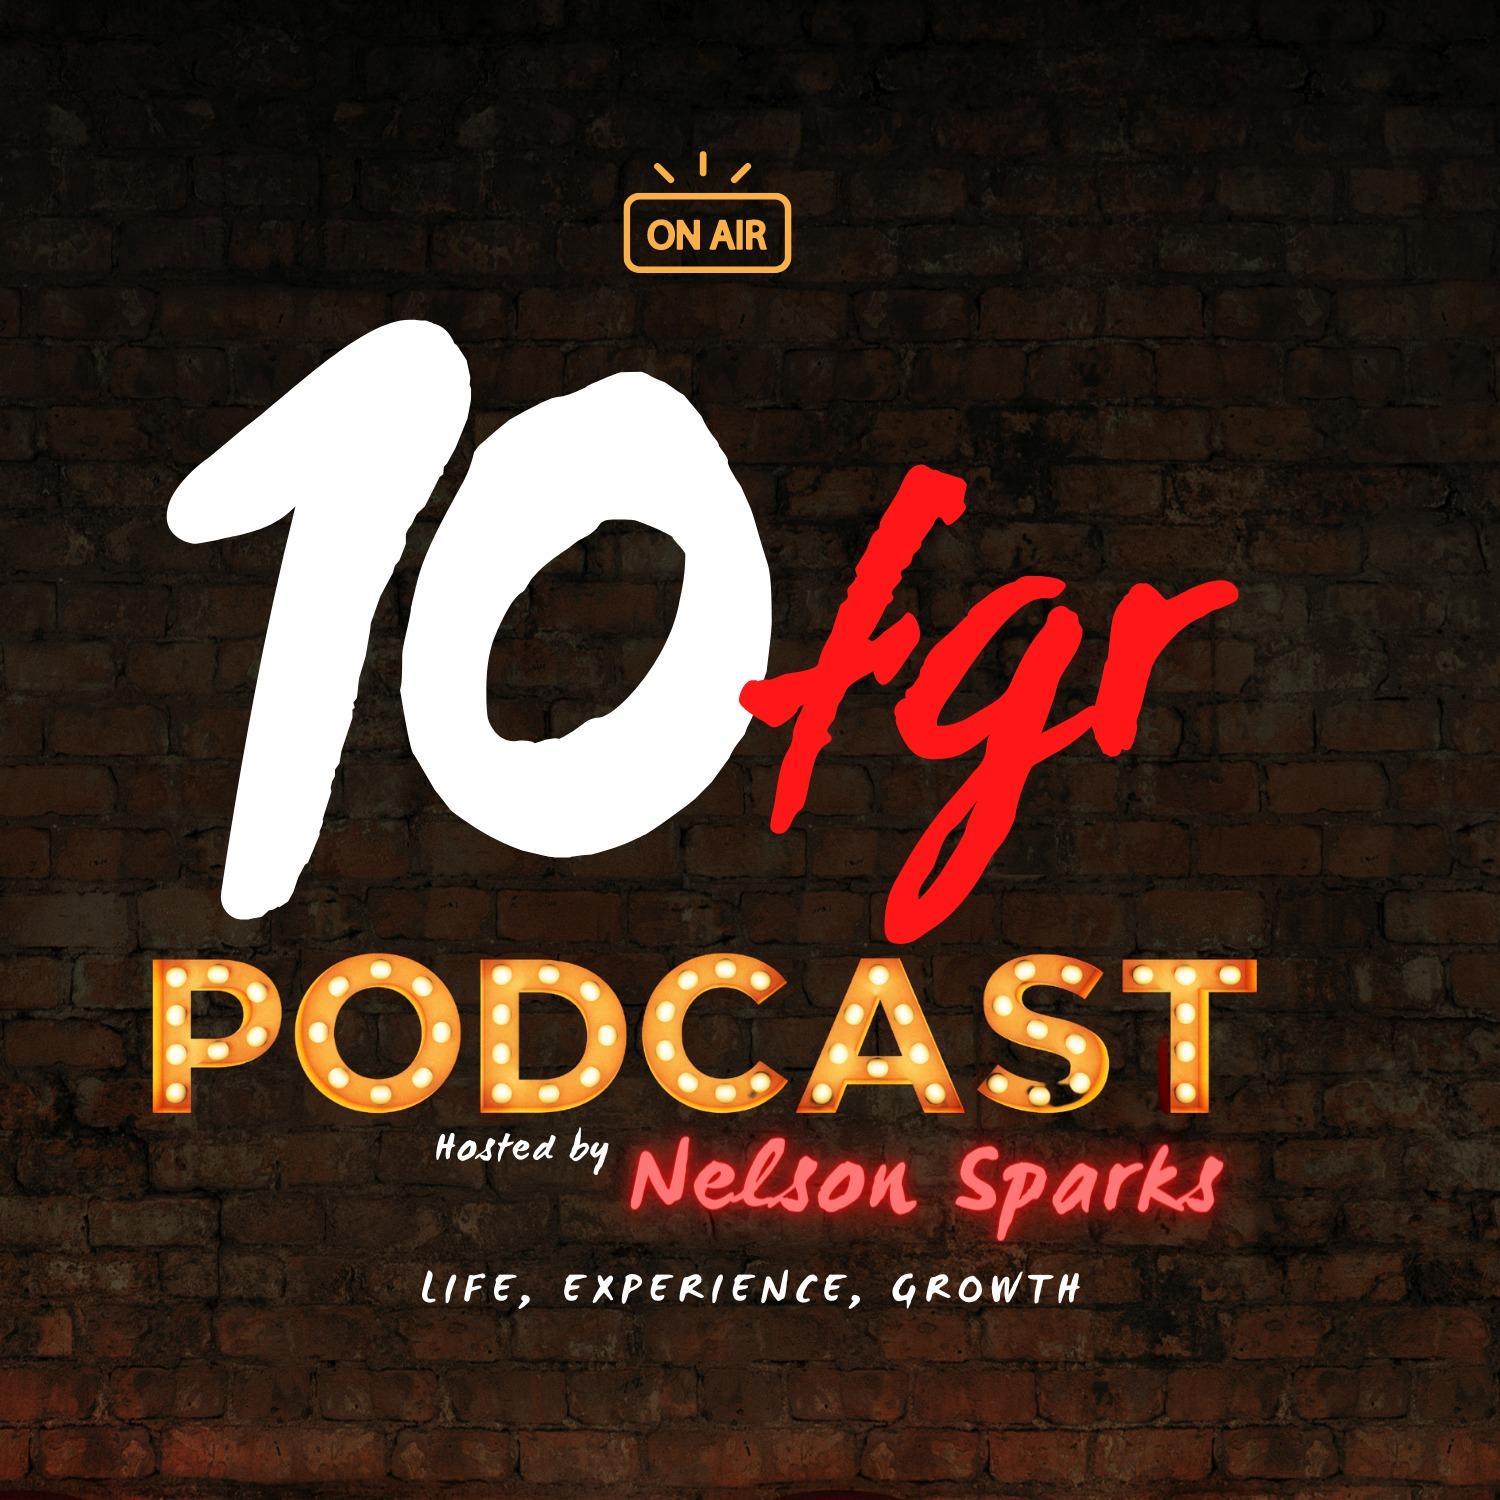 10fgr Podcast hosted by Nelson Sparks